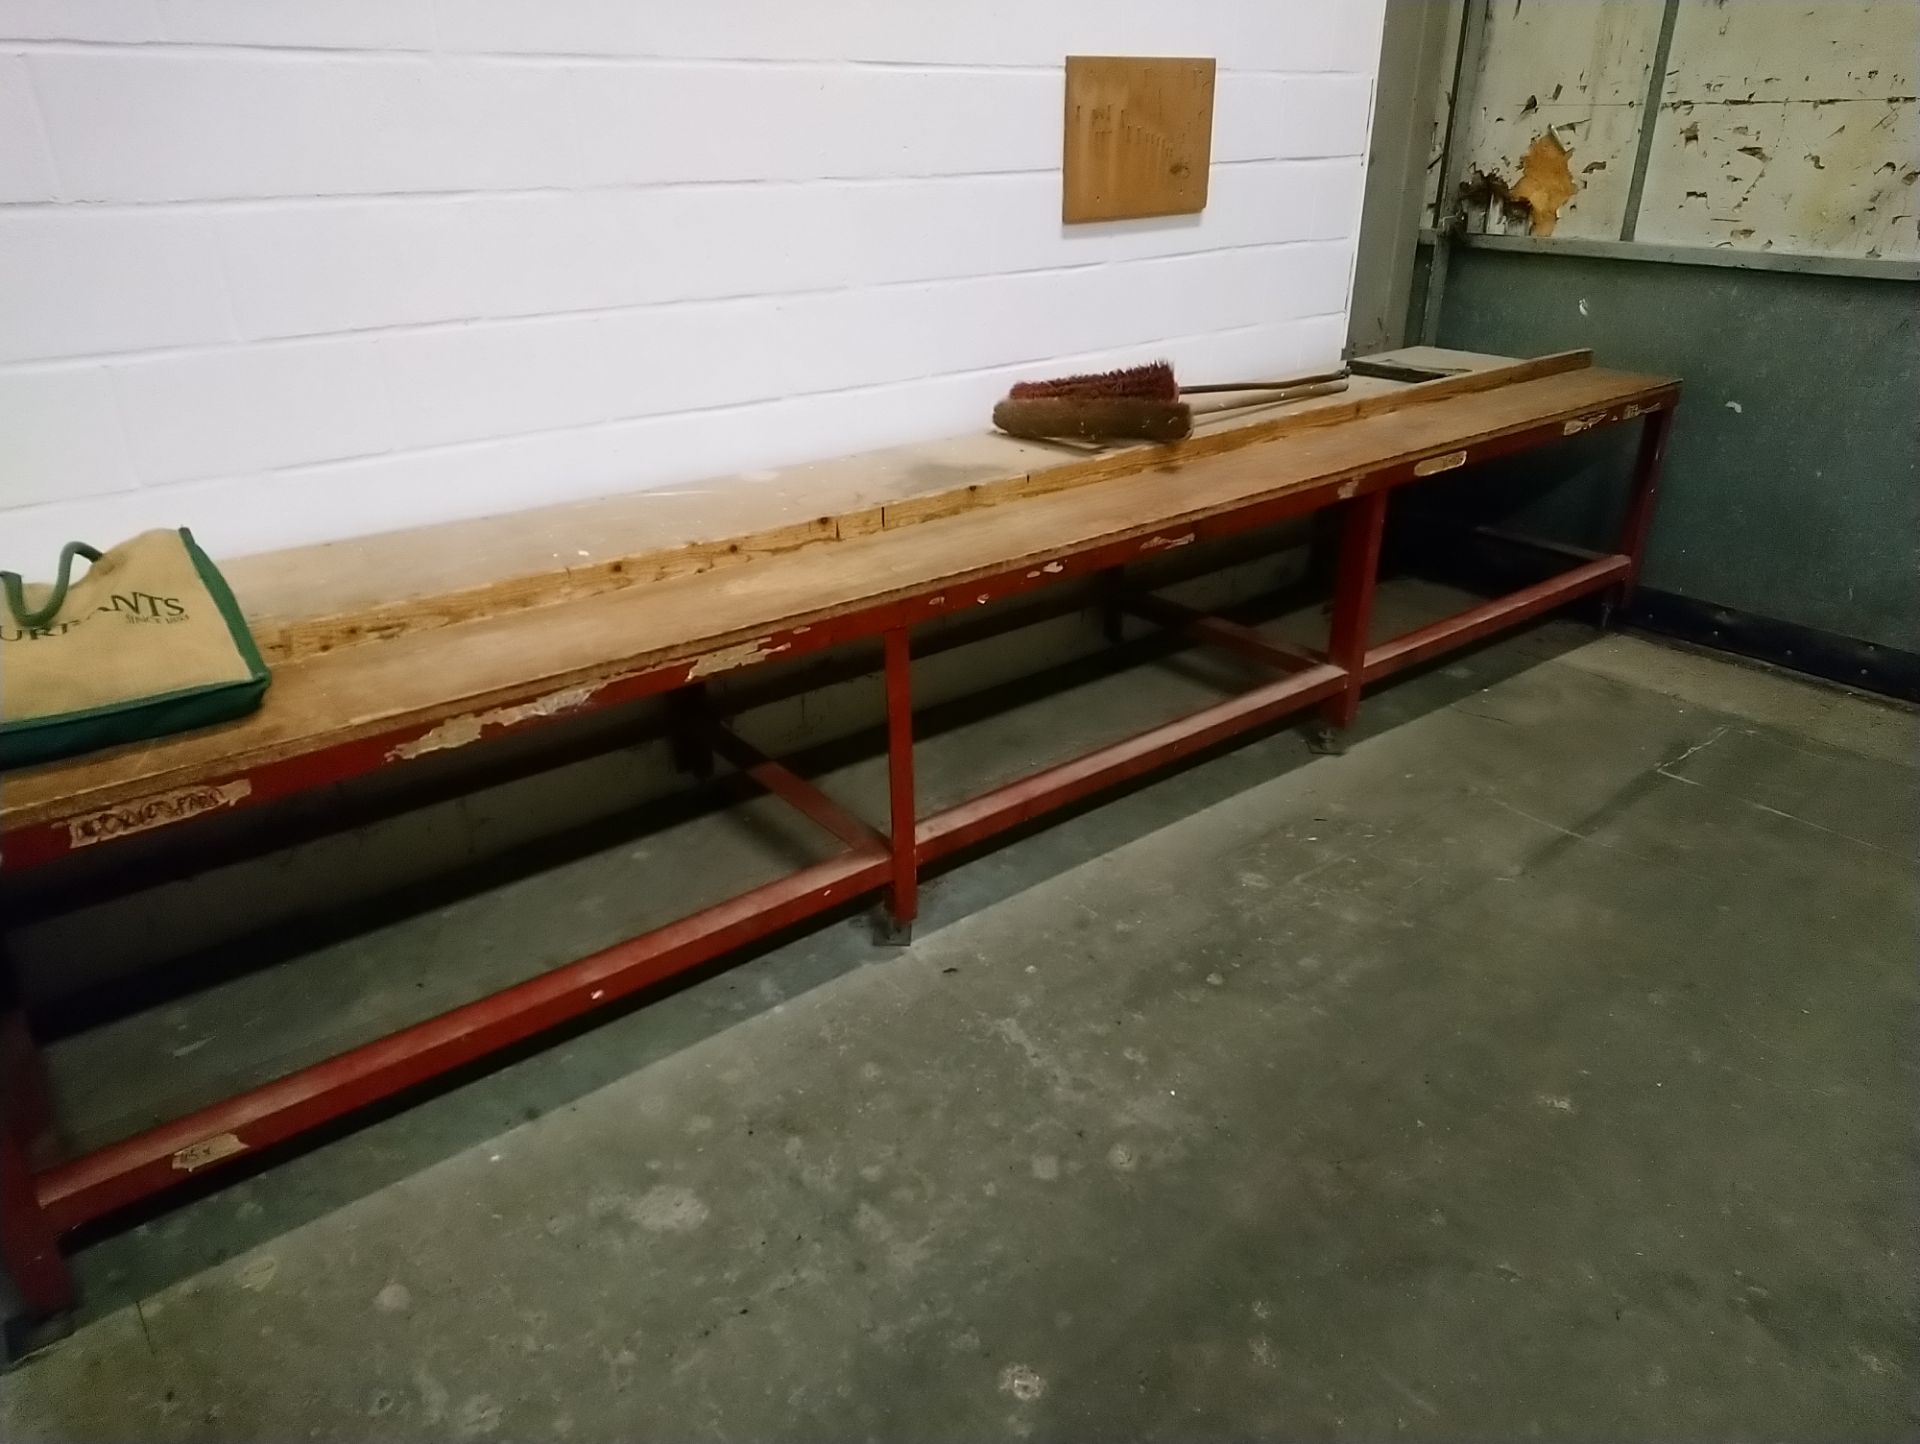 Metal framed work bench with wooden top (4.40m x 0.